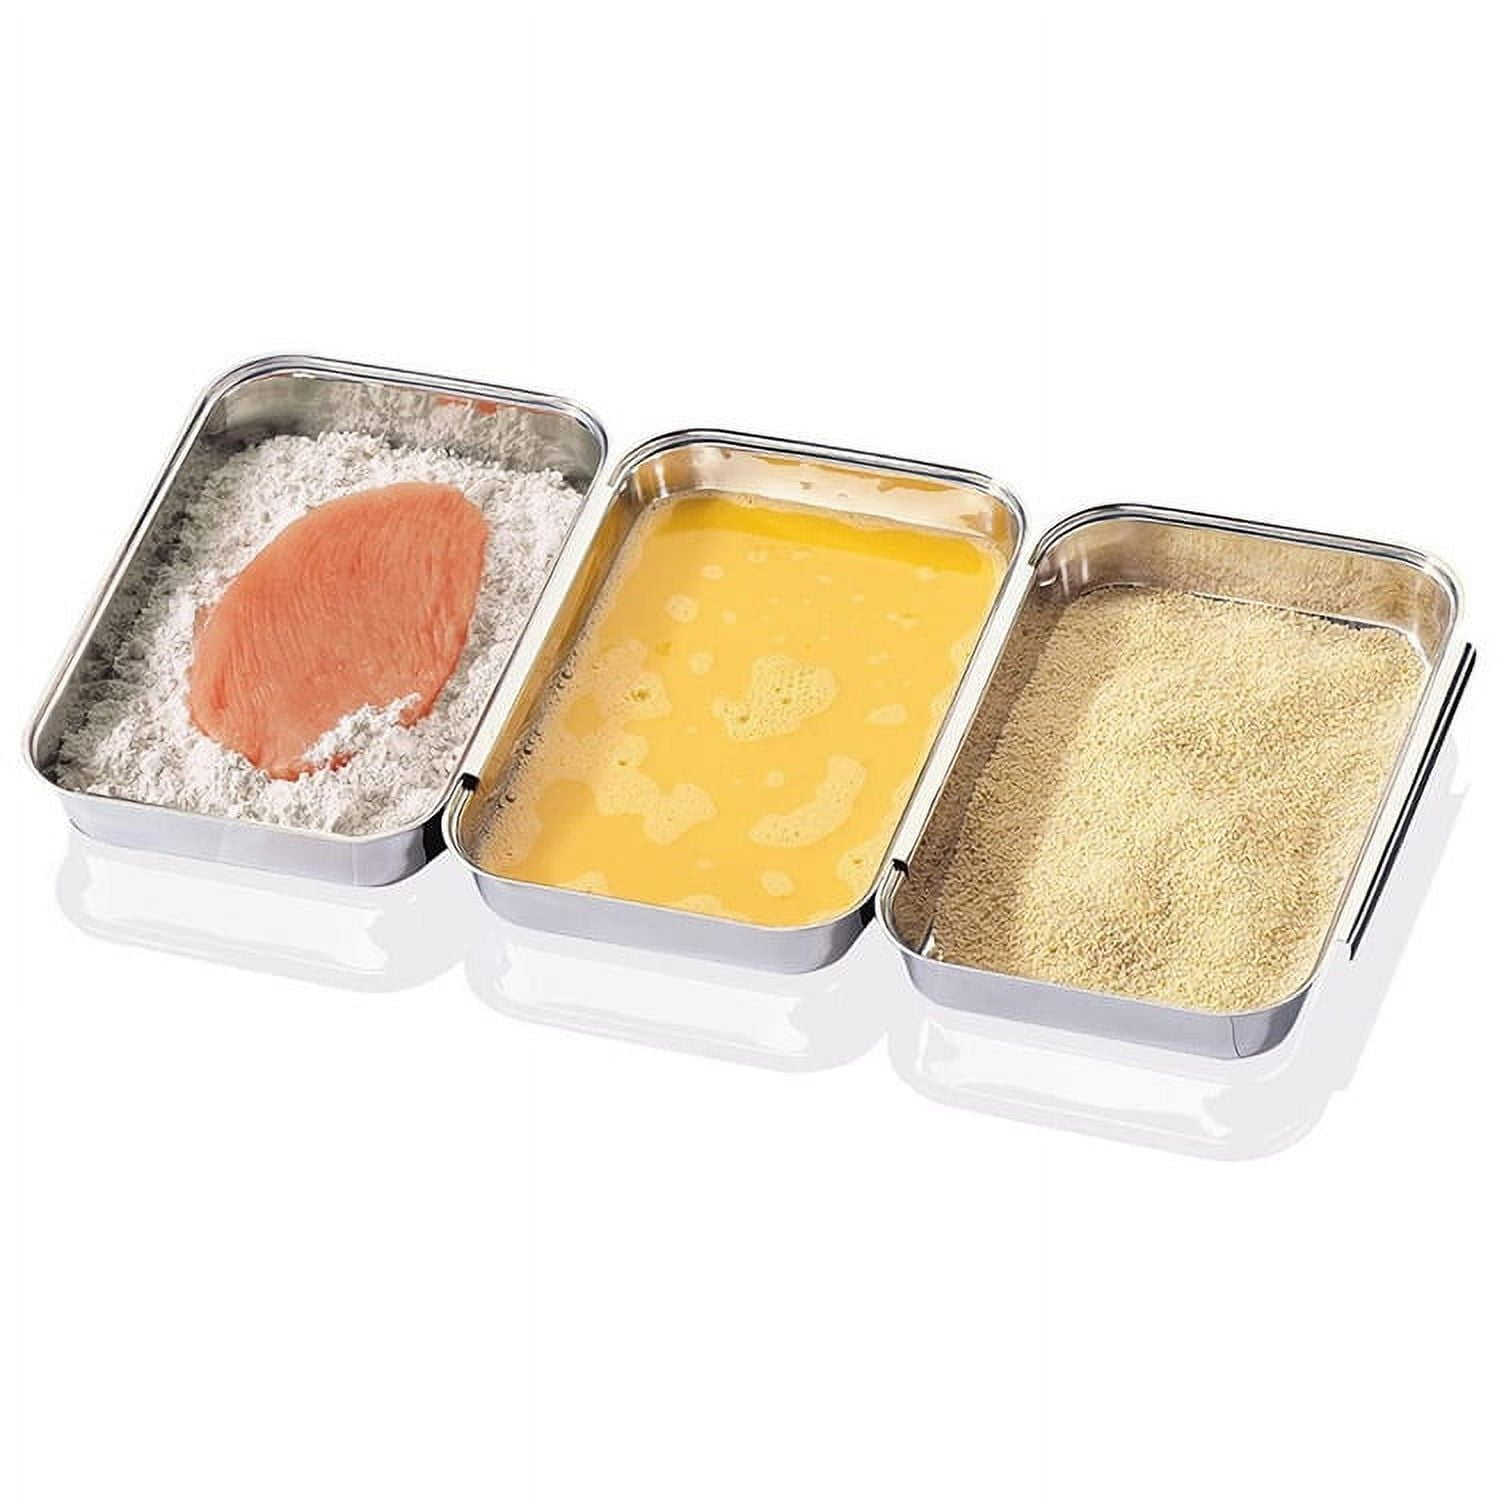 Mumufy Breading Trays Set of 3 Large Stainless Steel Breading Pans with  Tong for Dredging Chicken Breasts and Marinating Meat, Food Prep Trays for  Breadcrum Dishes (10.63 x 7.87 x 2.75 Inches) 